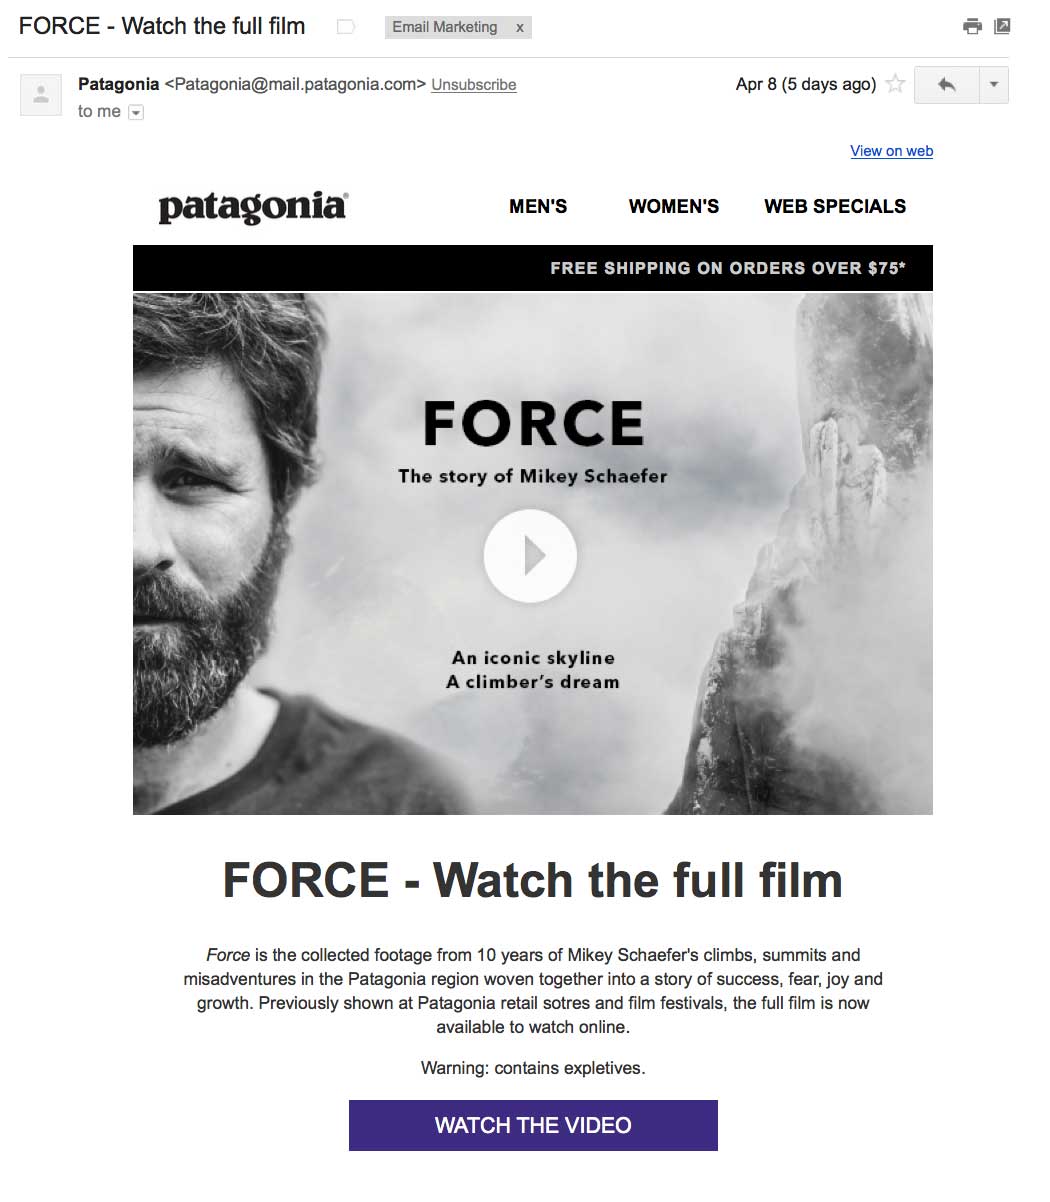 Patagonia uses a static image that looks like a video in their emails, then sends subscribers to a landing page where the video actually plays. This technique for video email marketing is widely used.